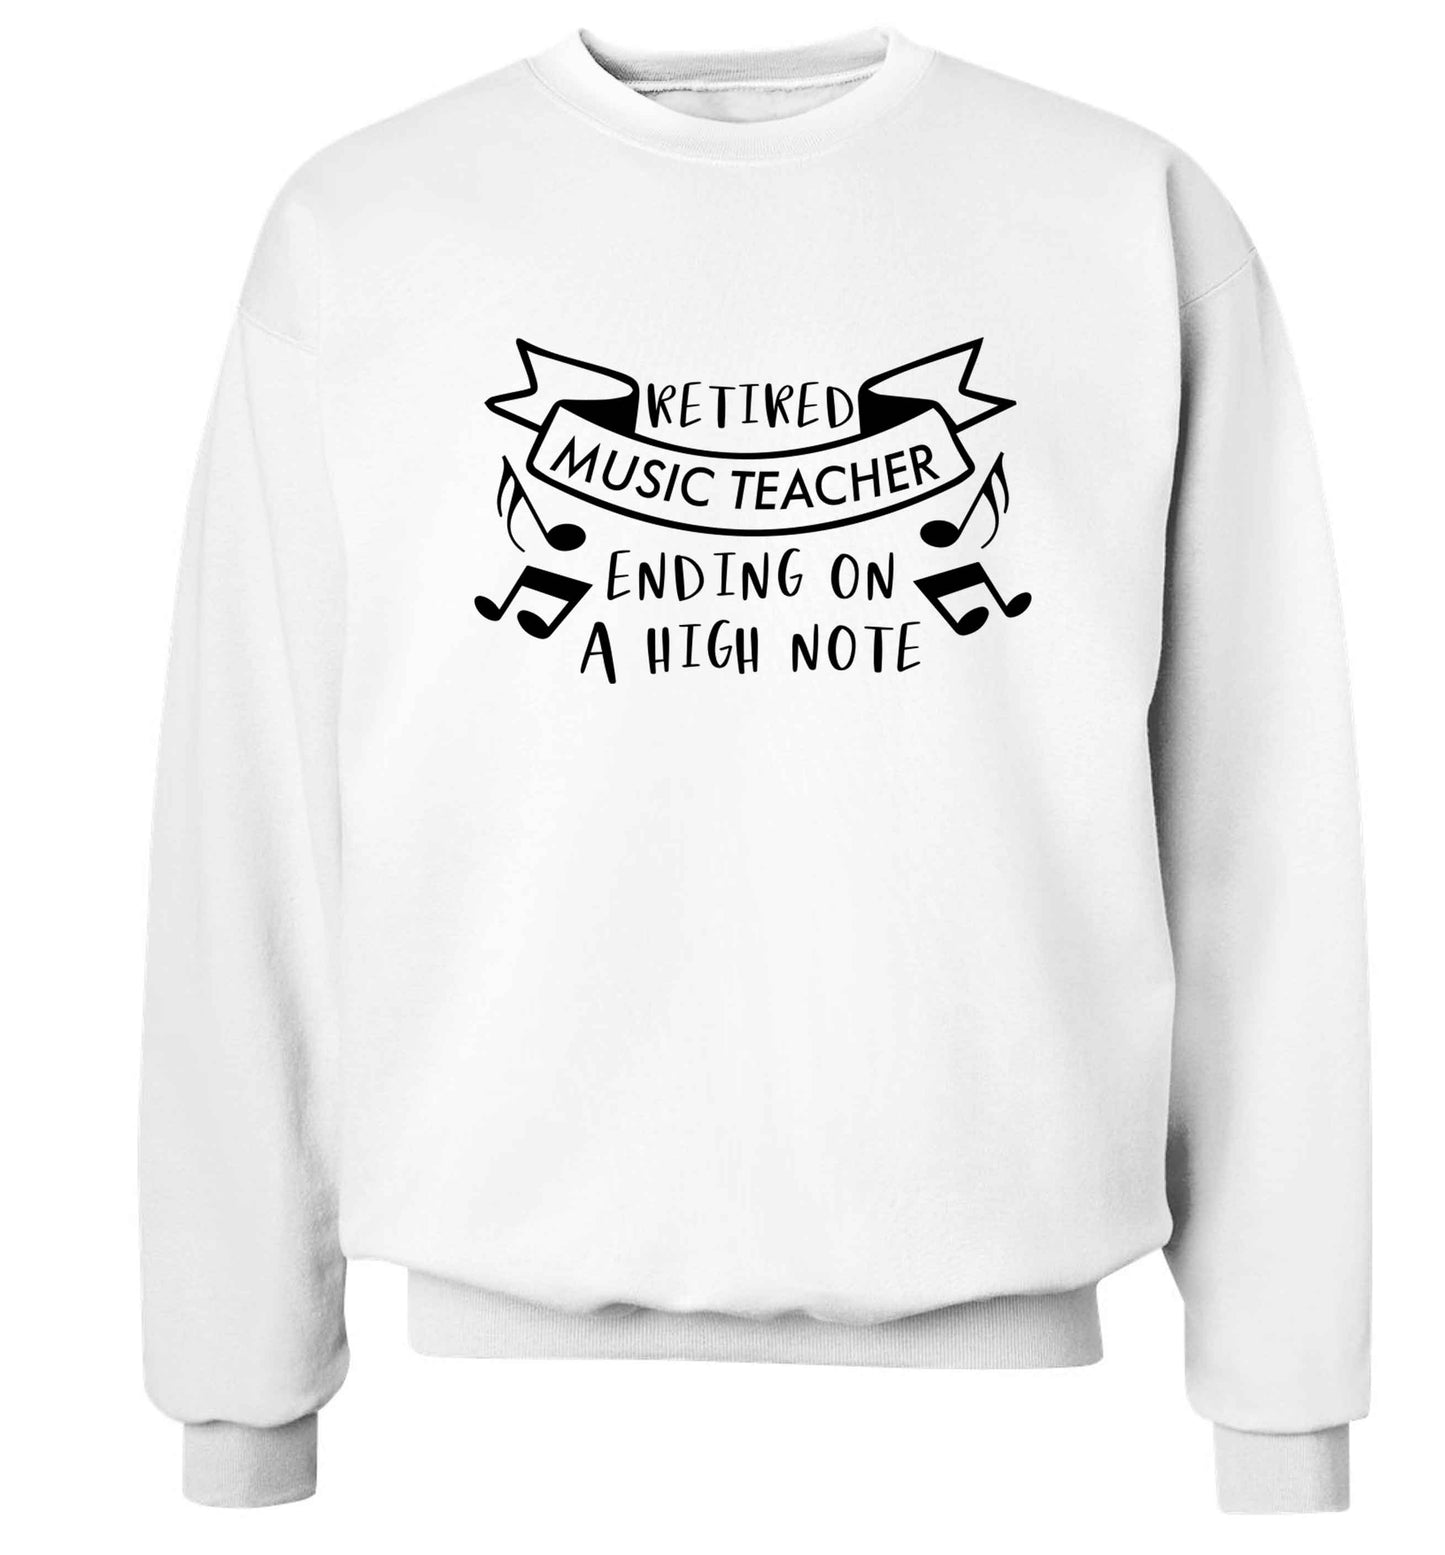 Retired music teacher ending on a high note Adult's unisex white Sweater 2XL